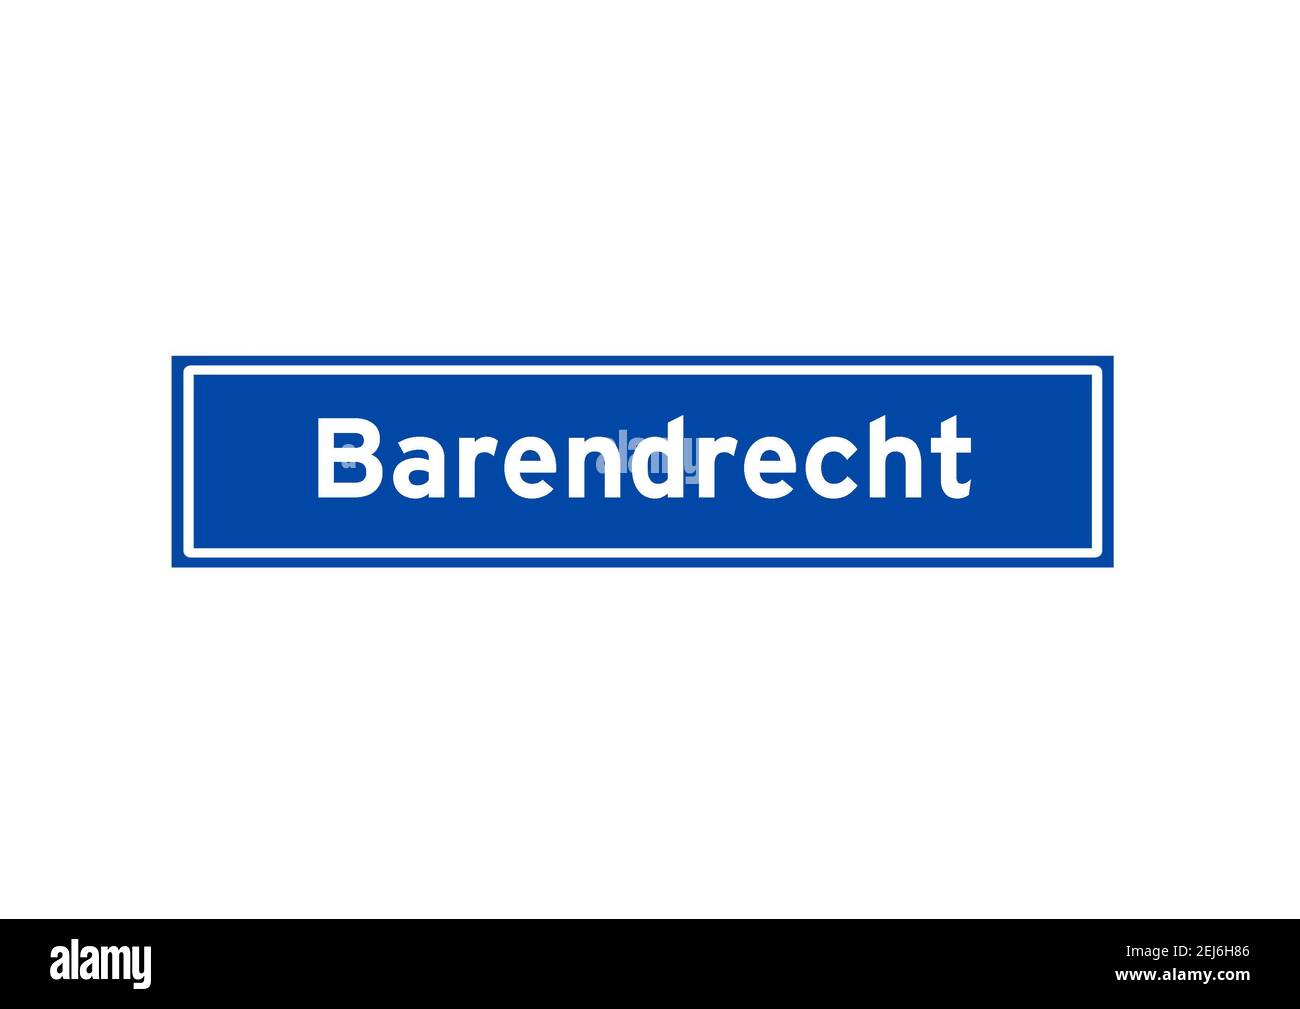 Barendrecht isolated Dutch place name sign. City sign from the Netherlands. Stock Photo